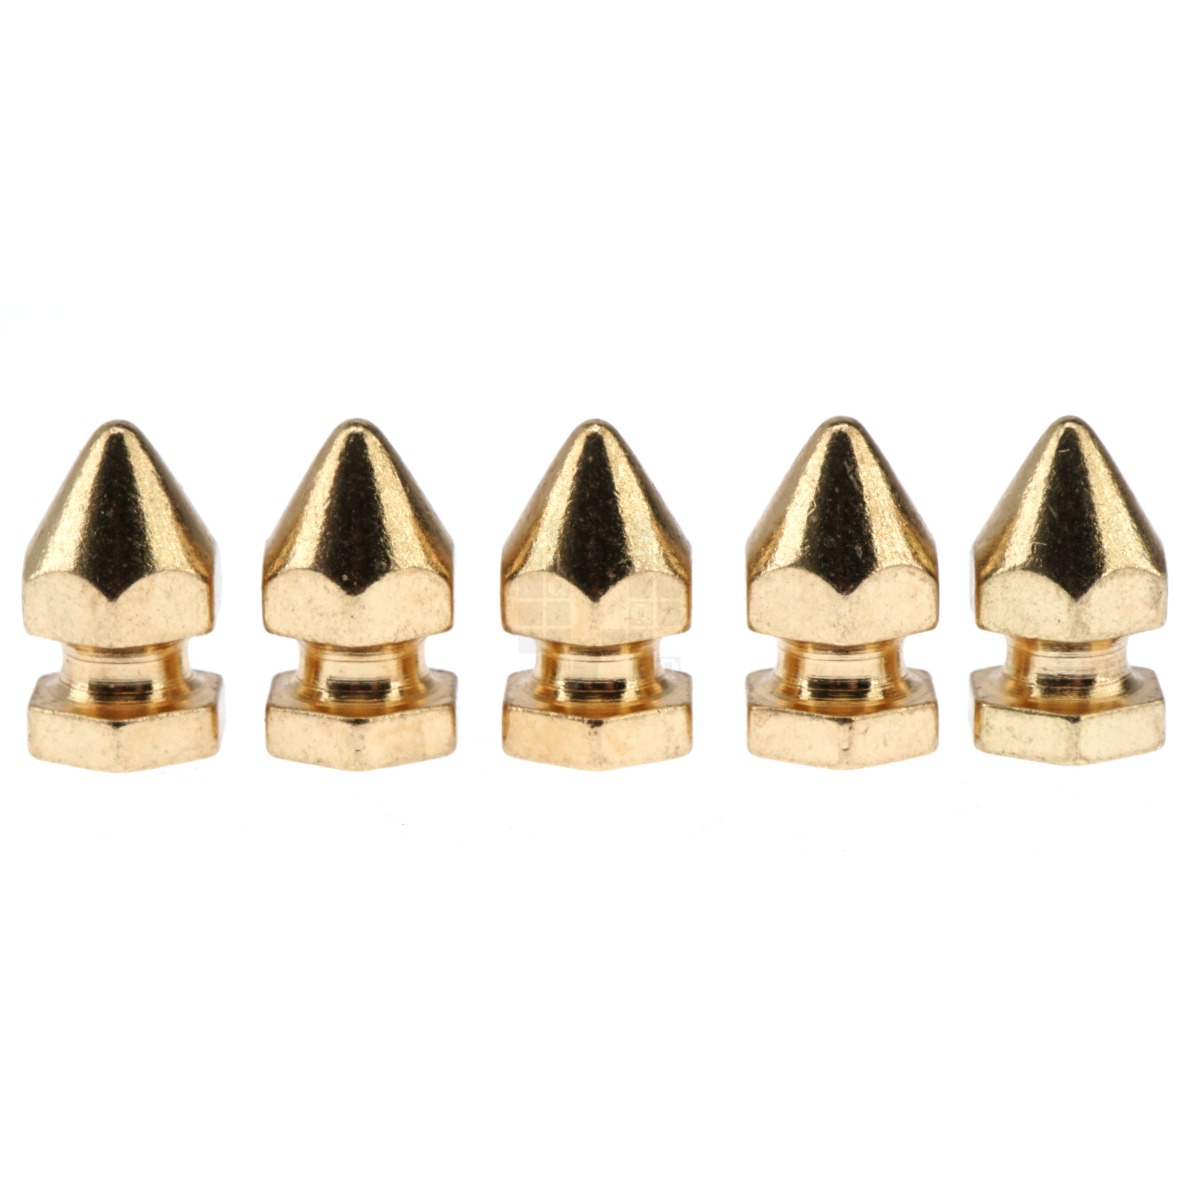 Gold Hex Tree Spike 8x14mm, Threaded Screw M3-0.5mm, 5 Pack